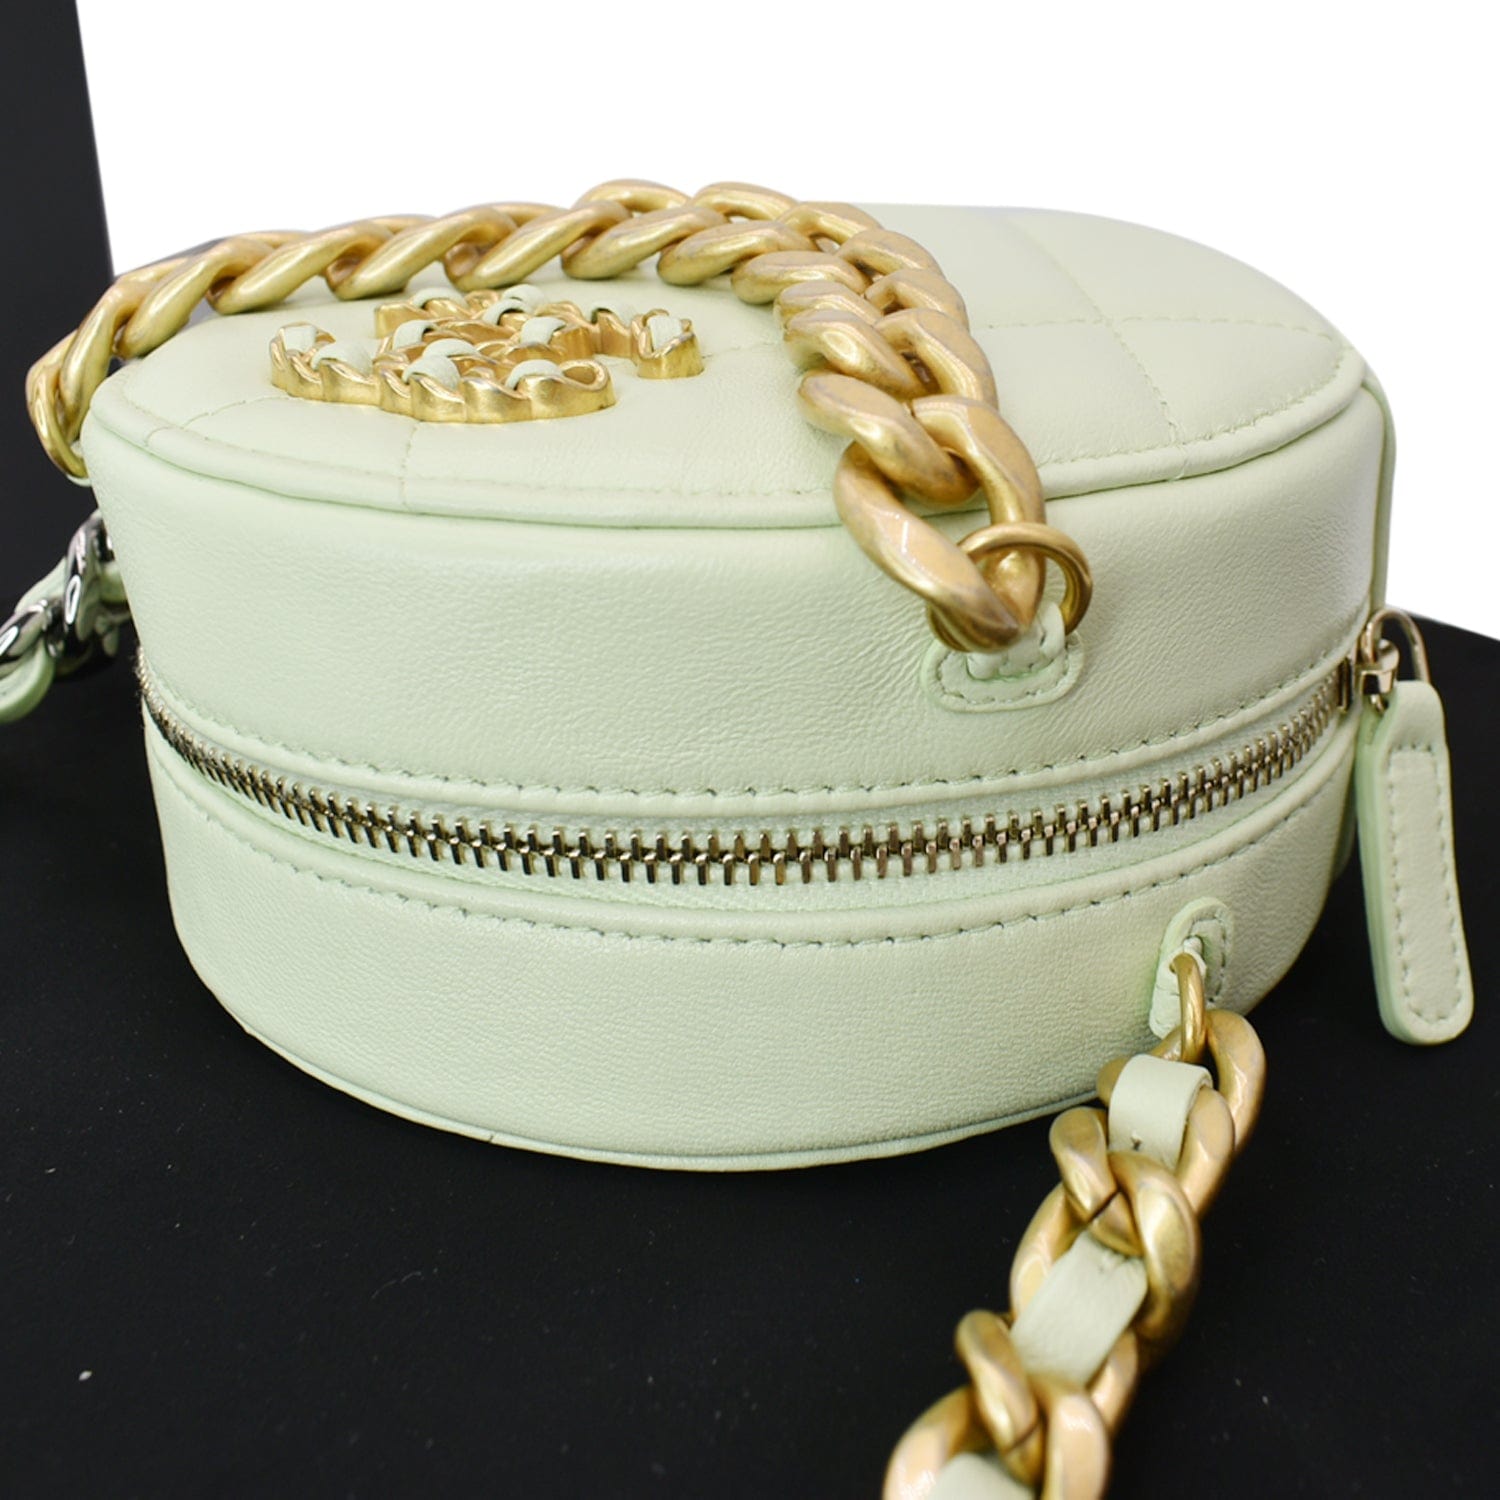 Shop Women's Fashion World Chain Clutch Bags up to 65% Off